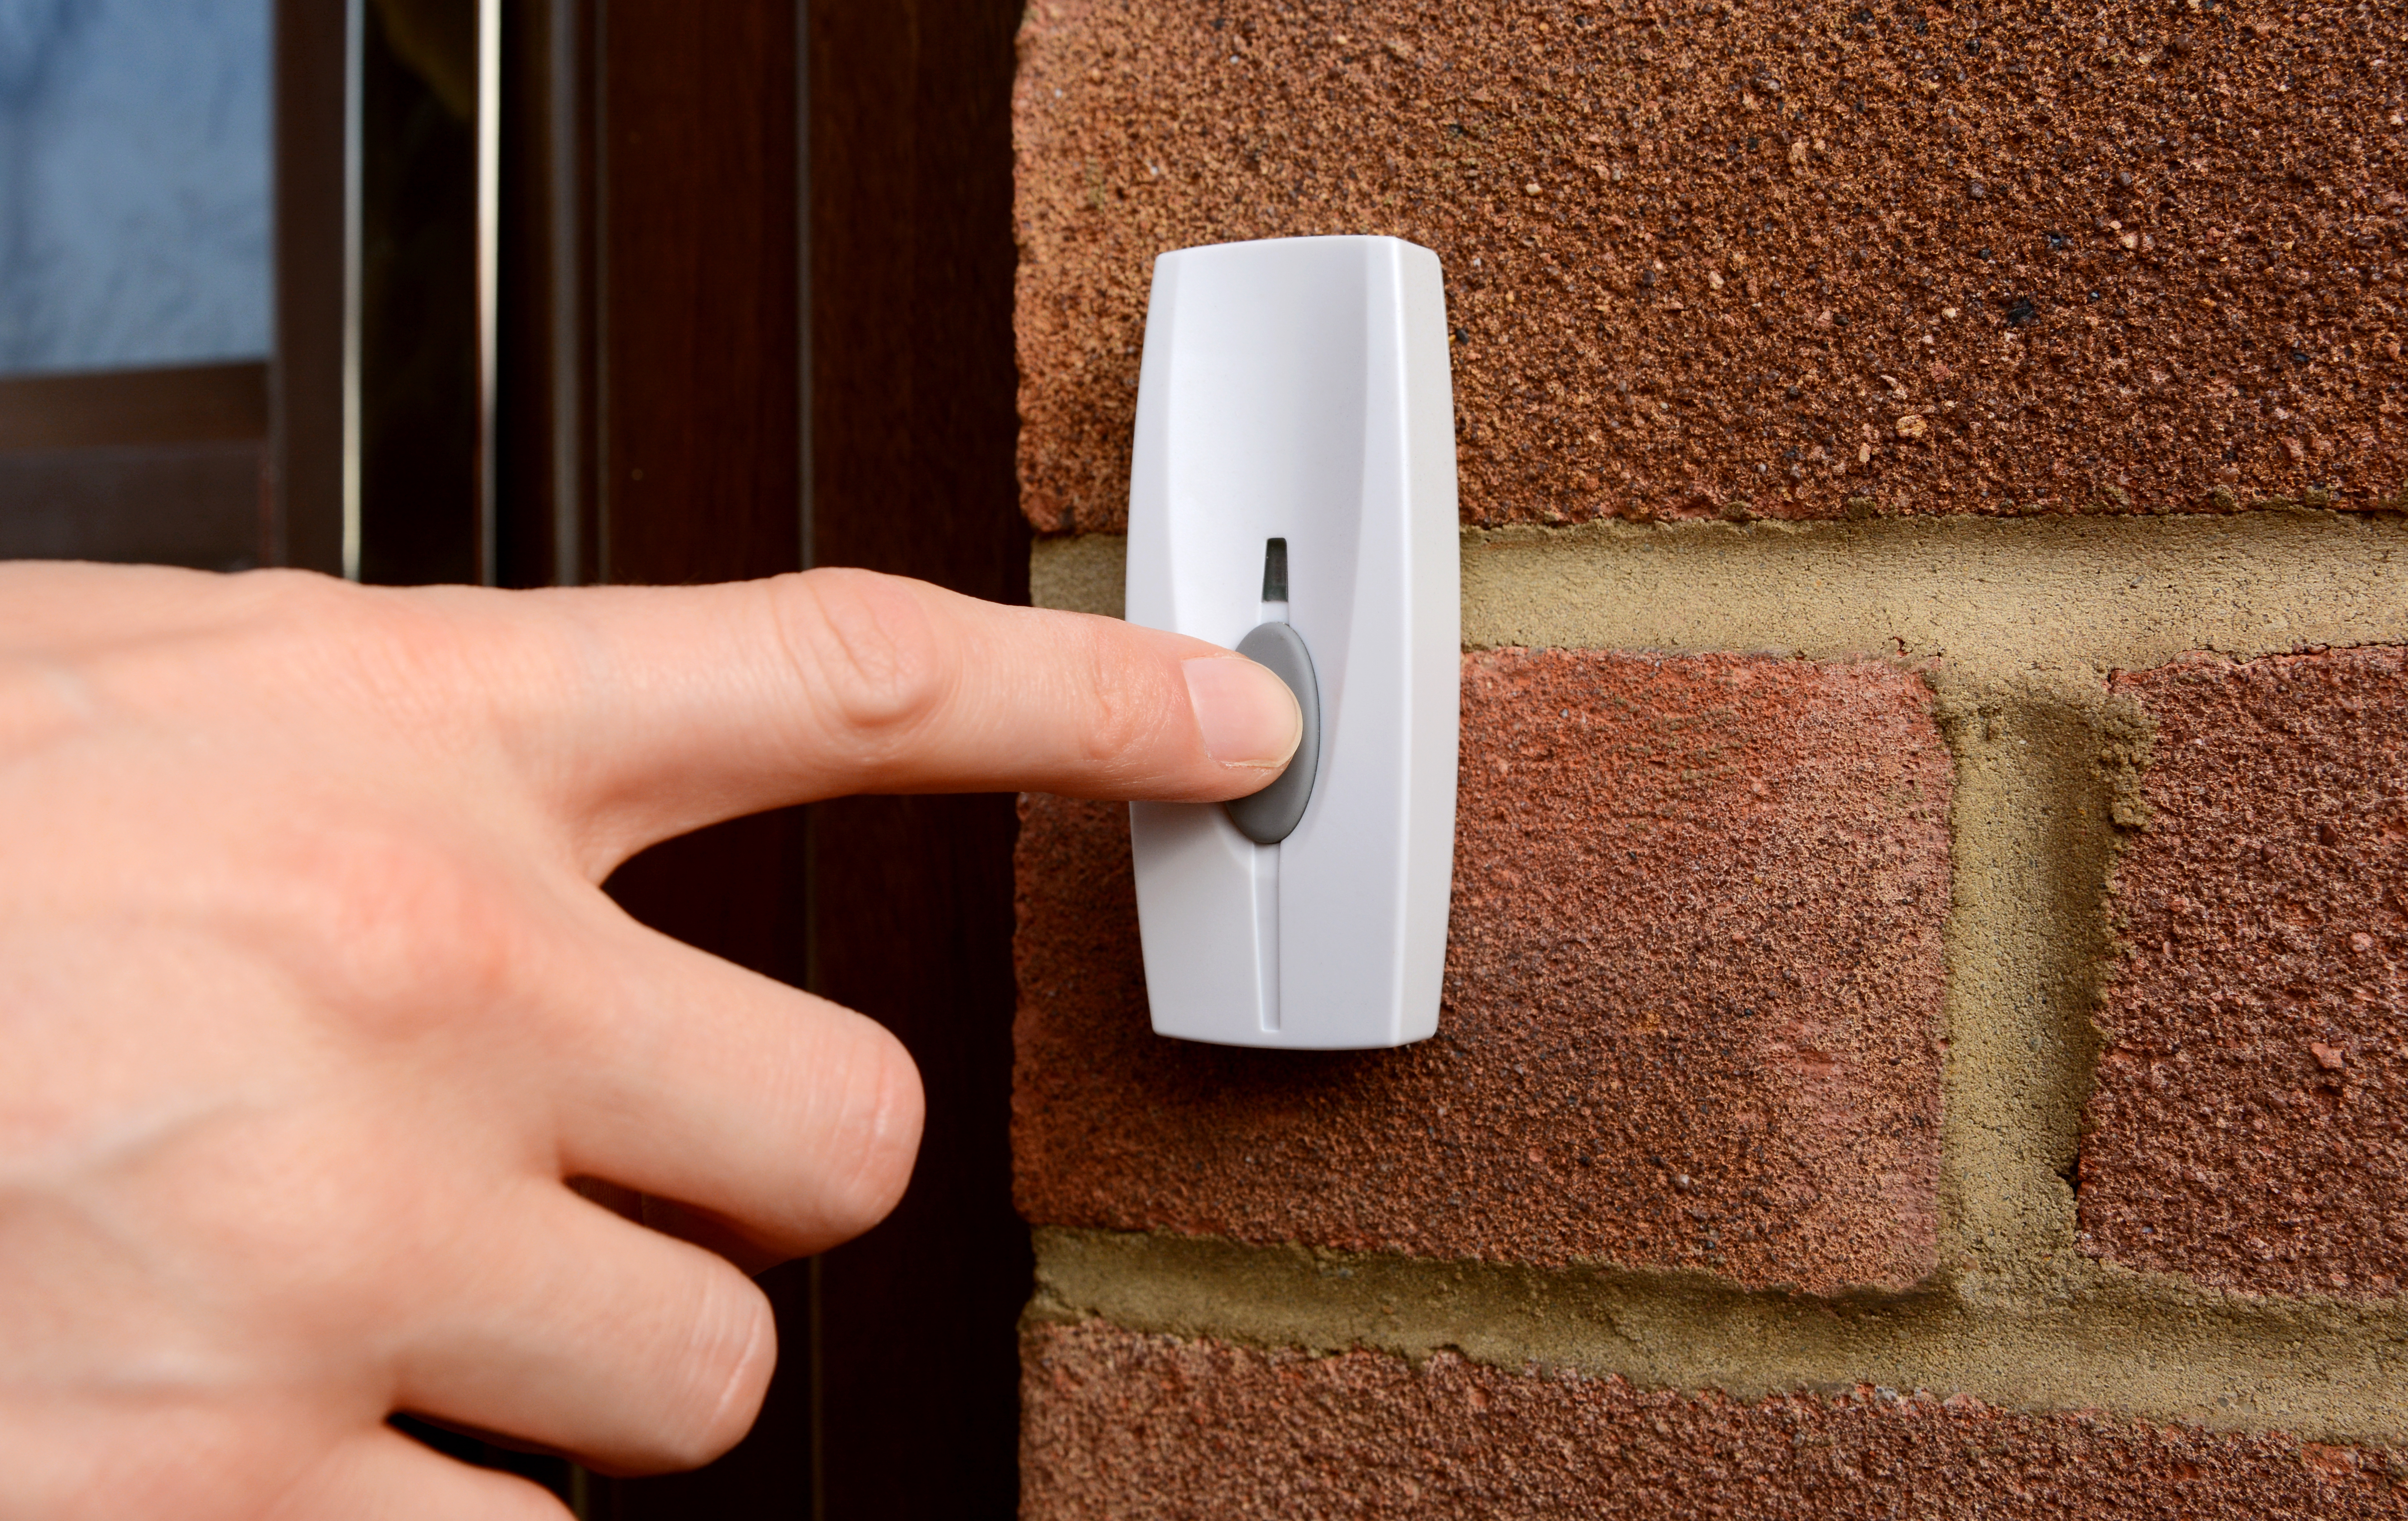 Close-up of woman pressing the button of a doorbell on a brick wall | Source: Shutterstock